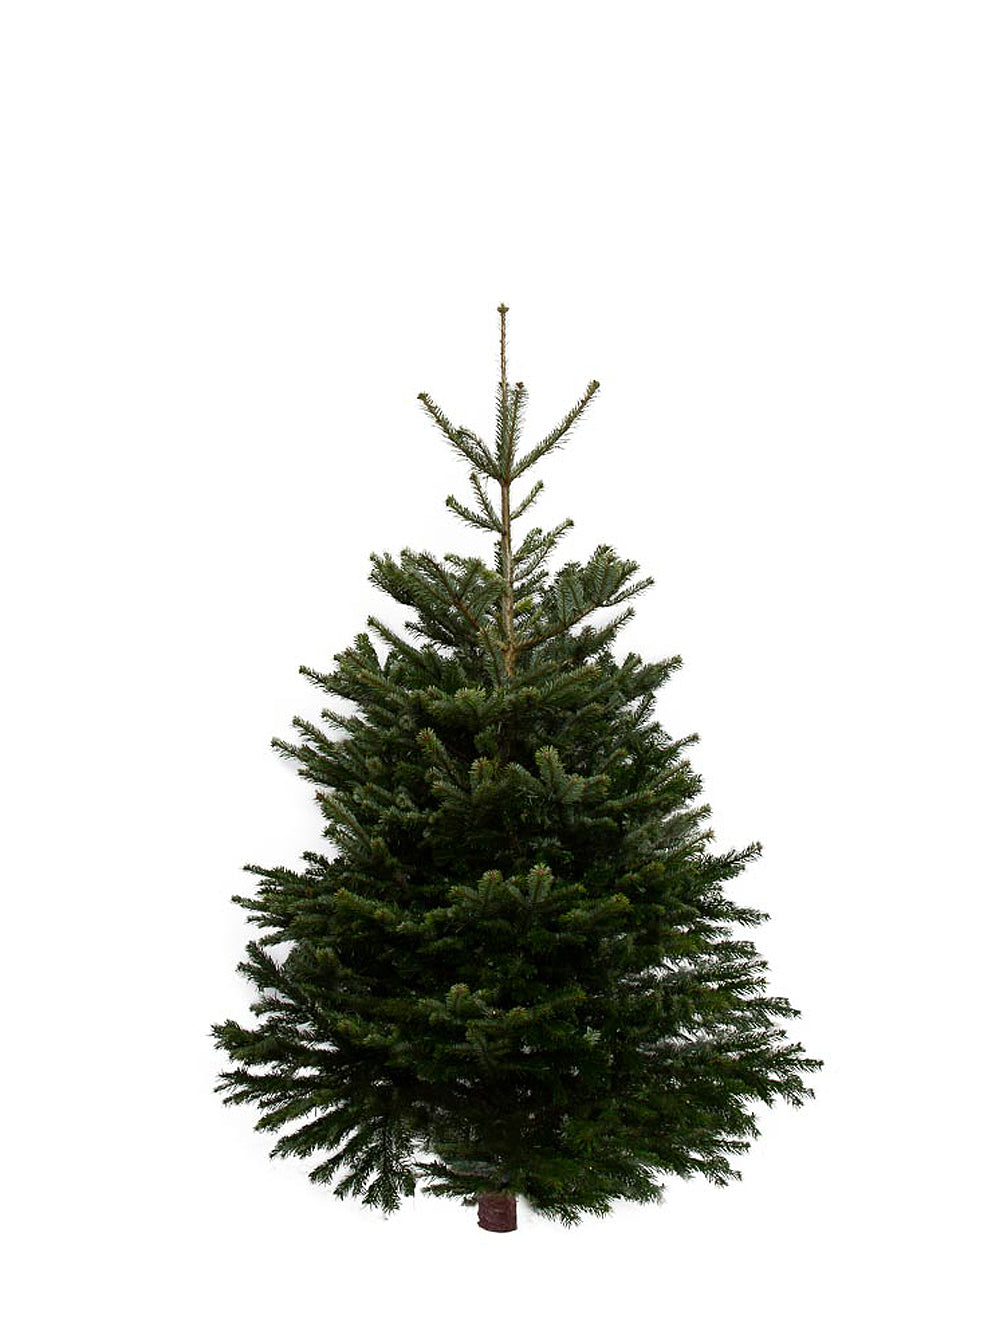 All Christmas Trees and Decorative Products